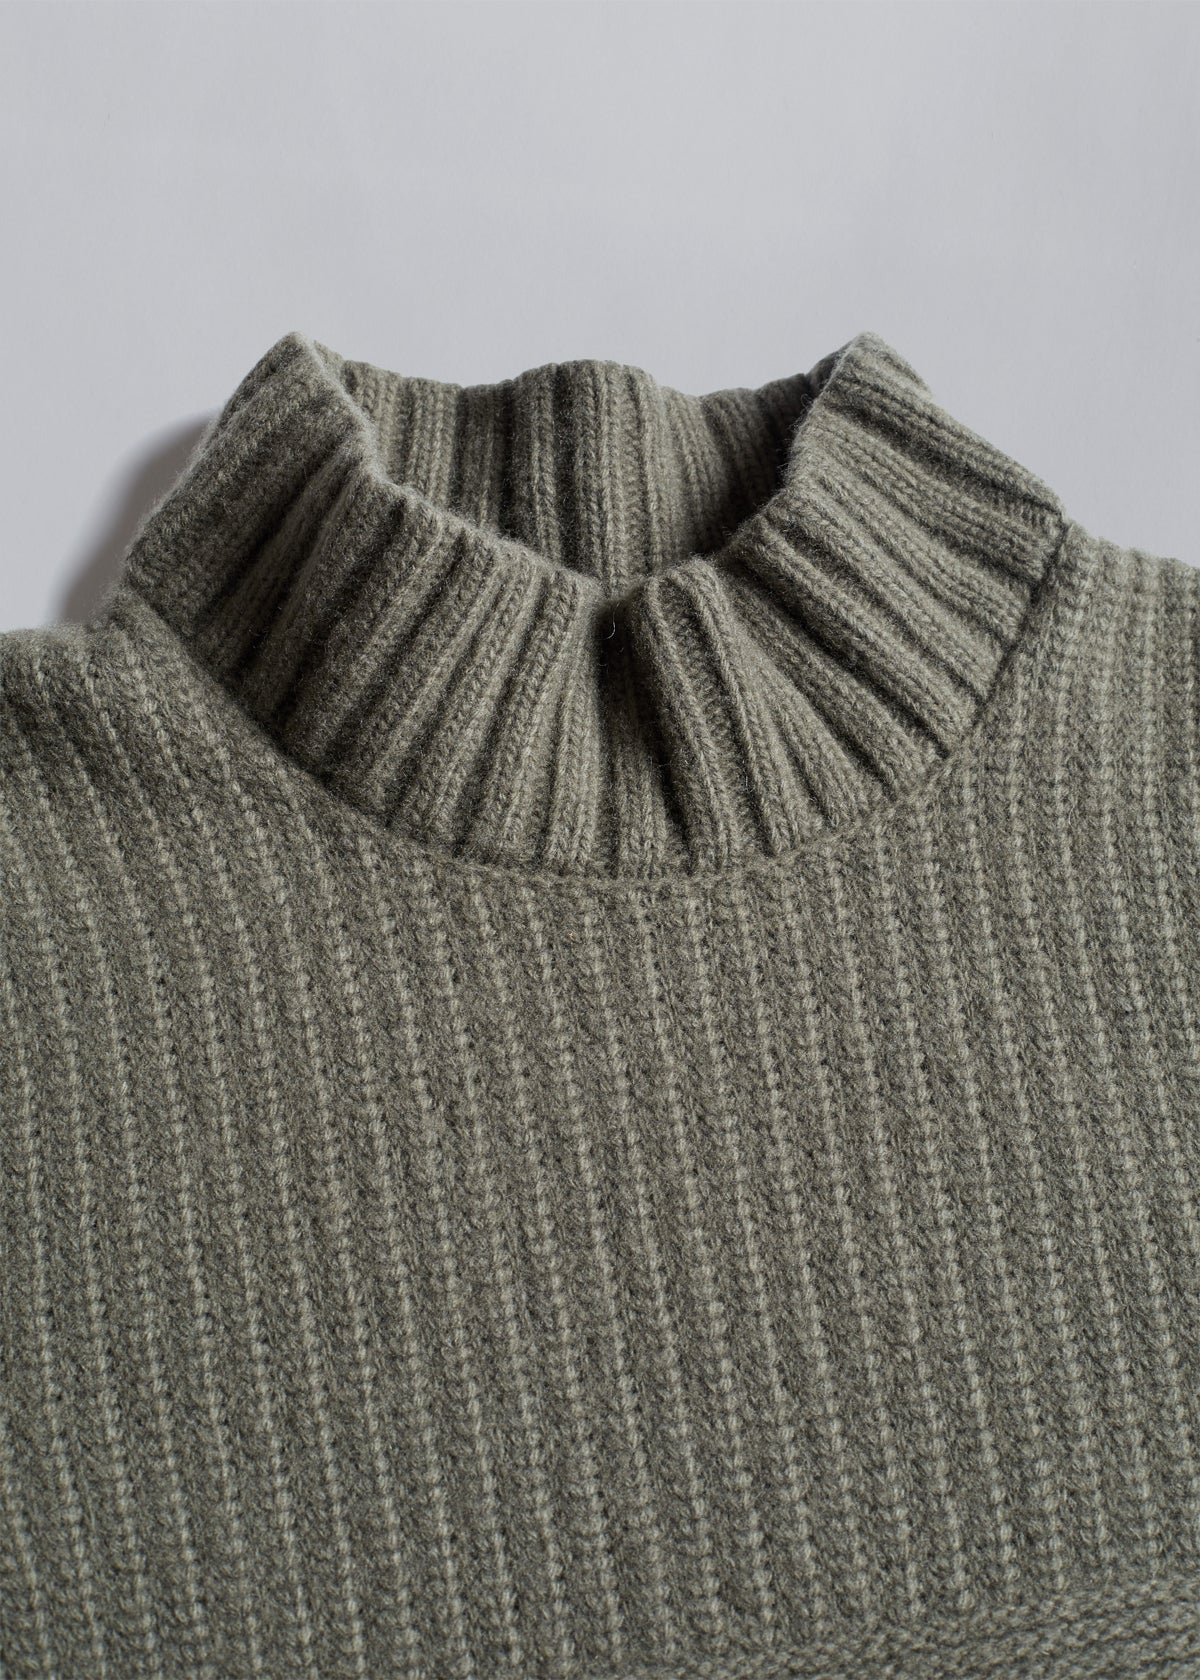 Lambswool Turtle Neck Knit AW2020 - 50IT - The Archivist Store